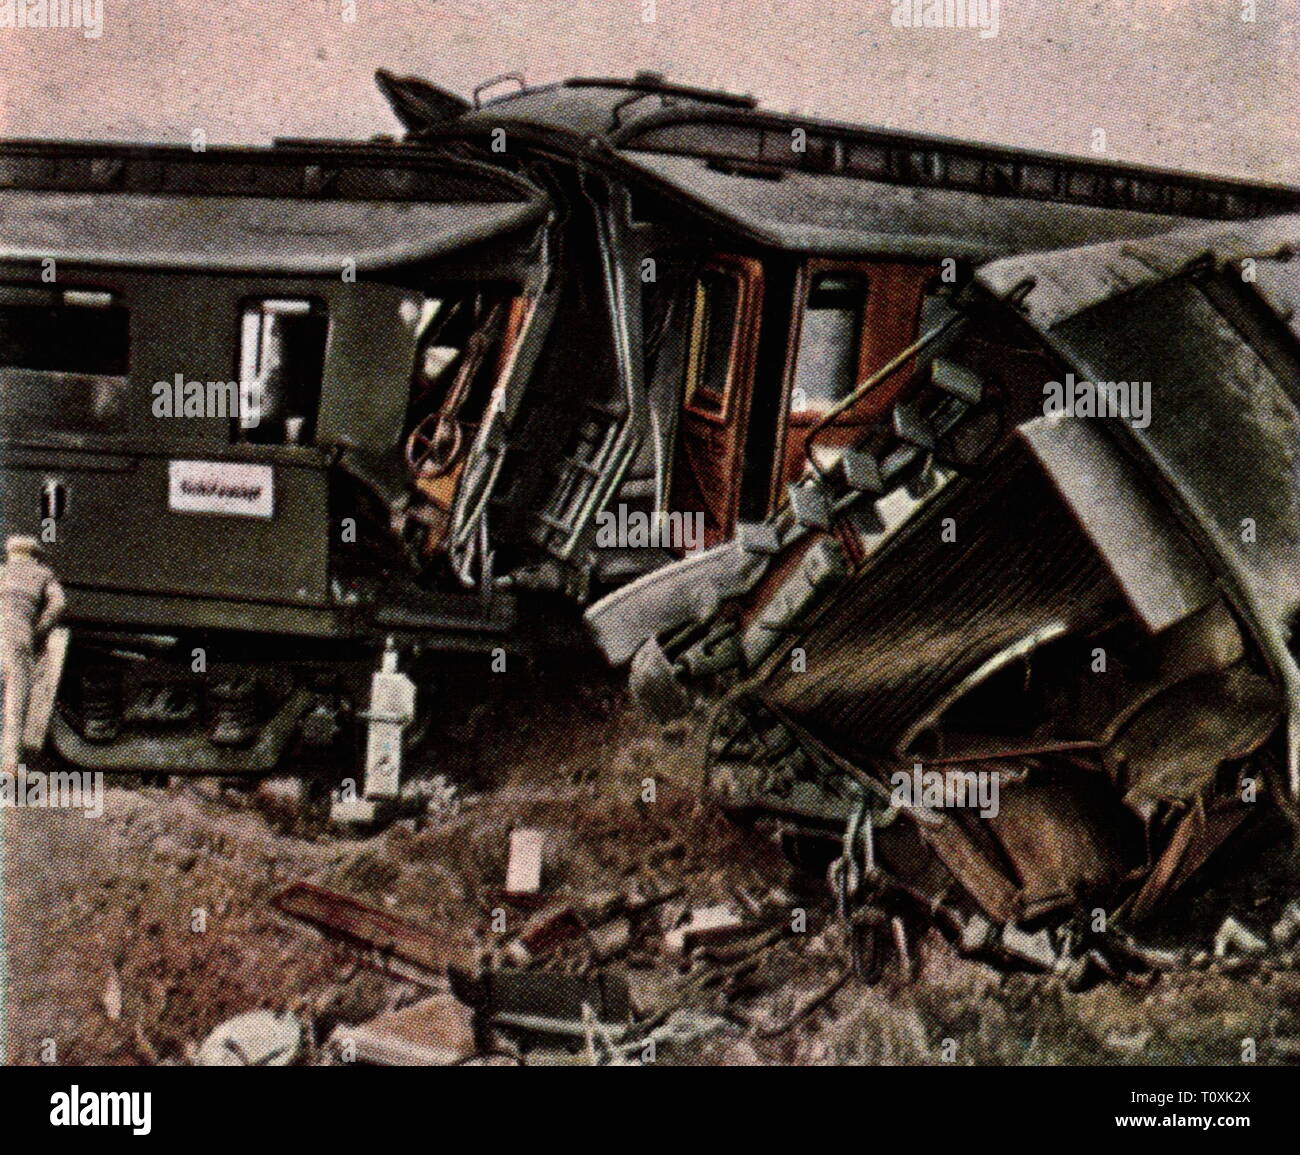 transport / transportation, railway, disasters, railway accident of Siegelsdorf, 10.6.1928, coloured photograph, cigarette card, series 'Die Nachkriegszeit', 1935, German State Railroad, Reichsbahn, German State Railways, railway accident, railway accidents, crash, crashes, derailment, derailed, wagon, the Free State of Bavaria, Franconia, Germany, German Reich, Weimar Republic, 1920s, 20th century, transport, transportation, railway, railroad, railways, railroads, disaster, disasters, coloured, colored, post war period, post-war period, post-war, Additional-Rights-Clearance-Info-Not-Available Stock Photo